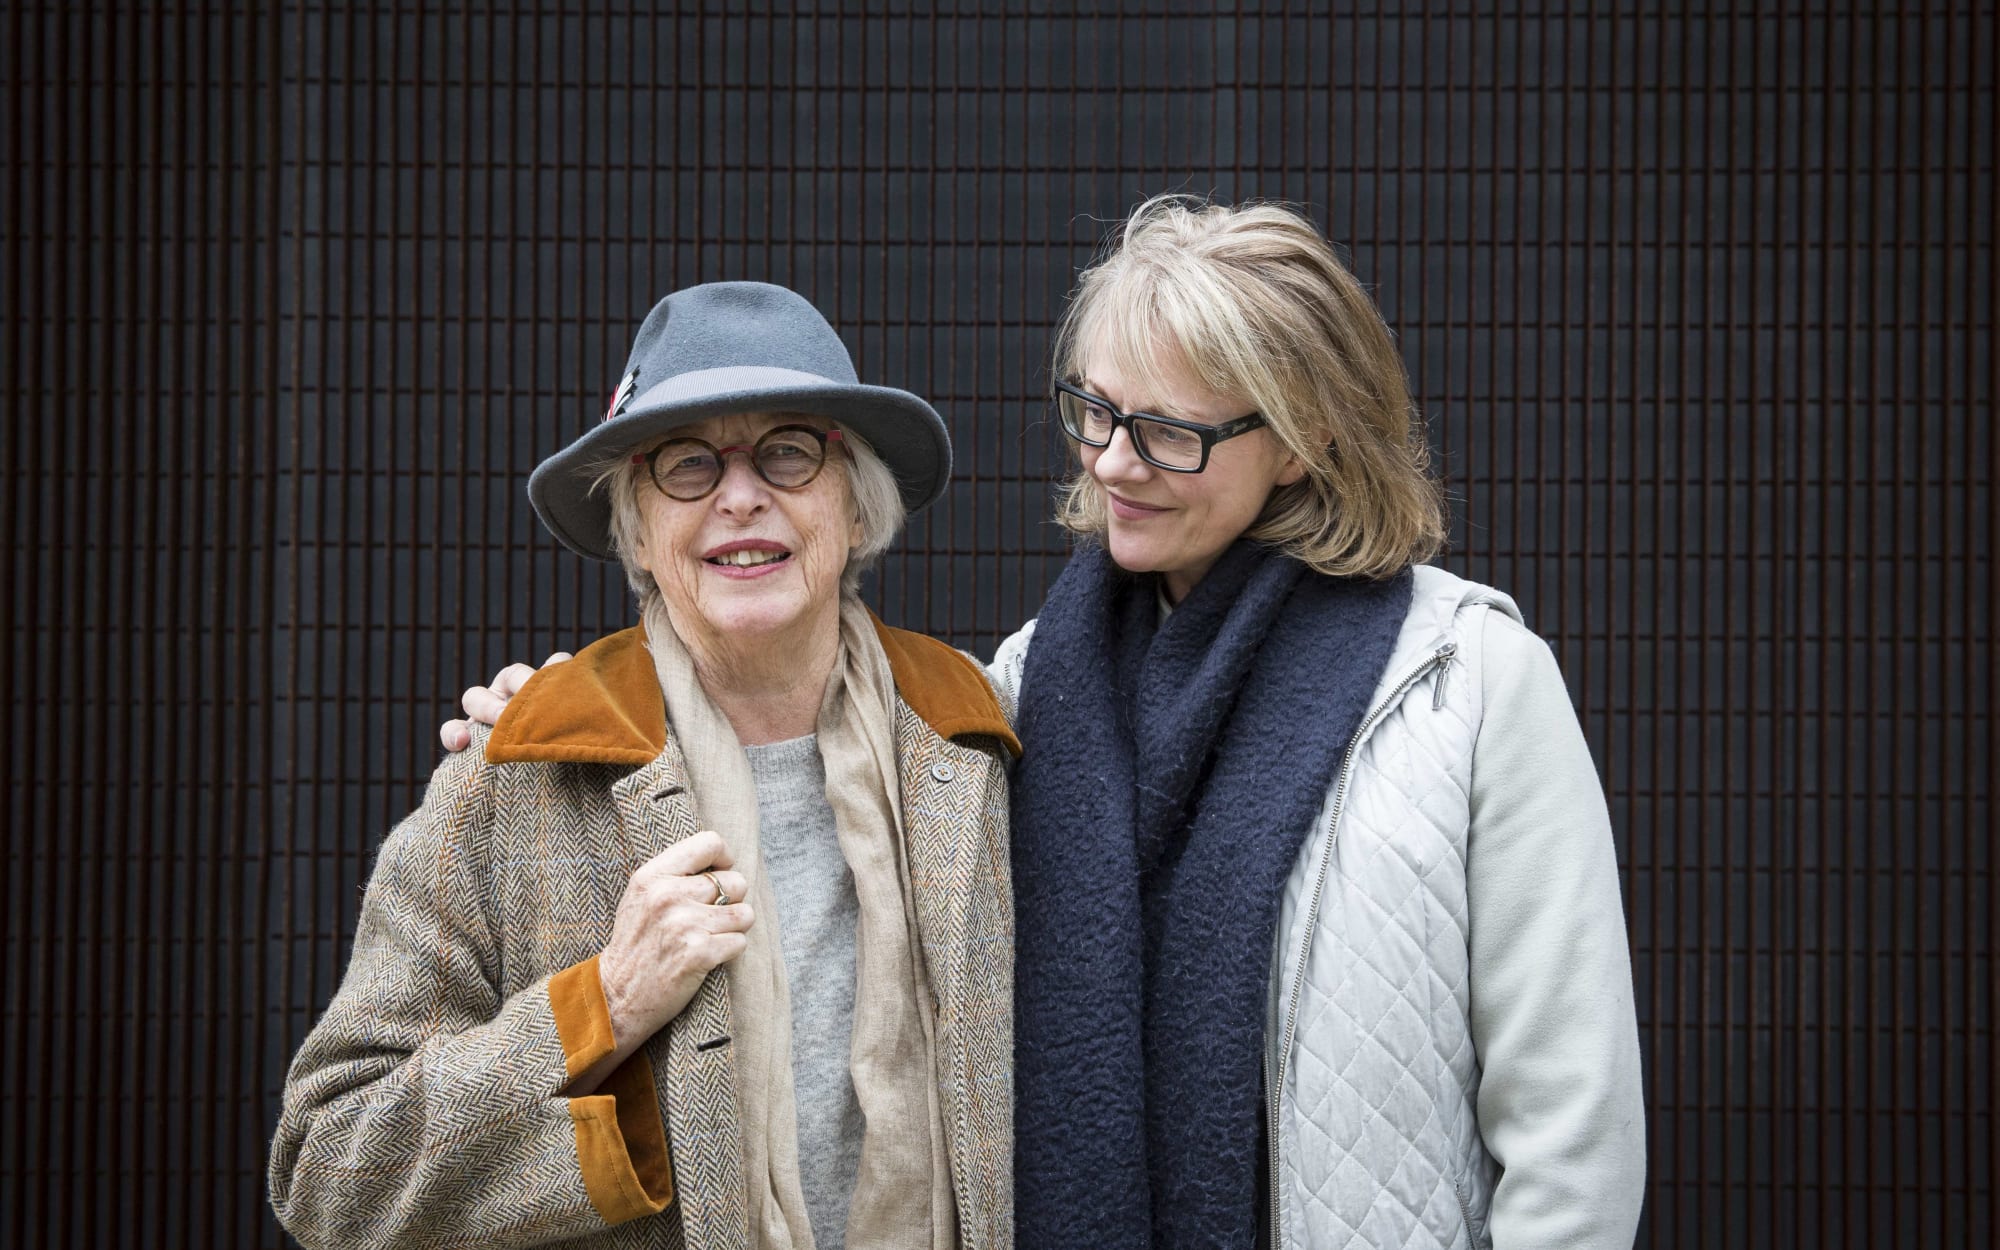 Portrait of the two women standing side by side in front of a dark background